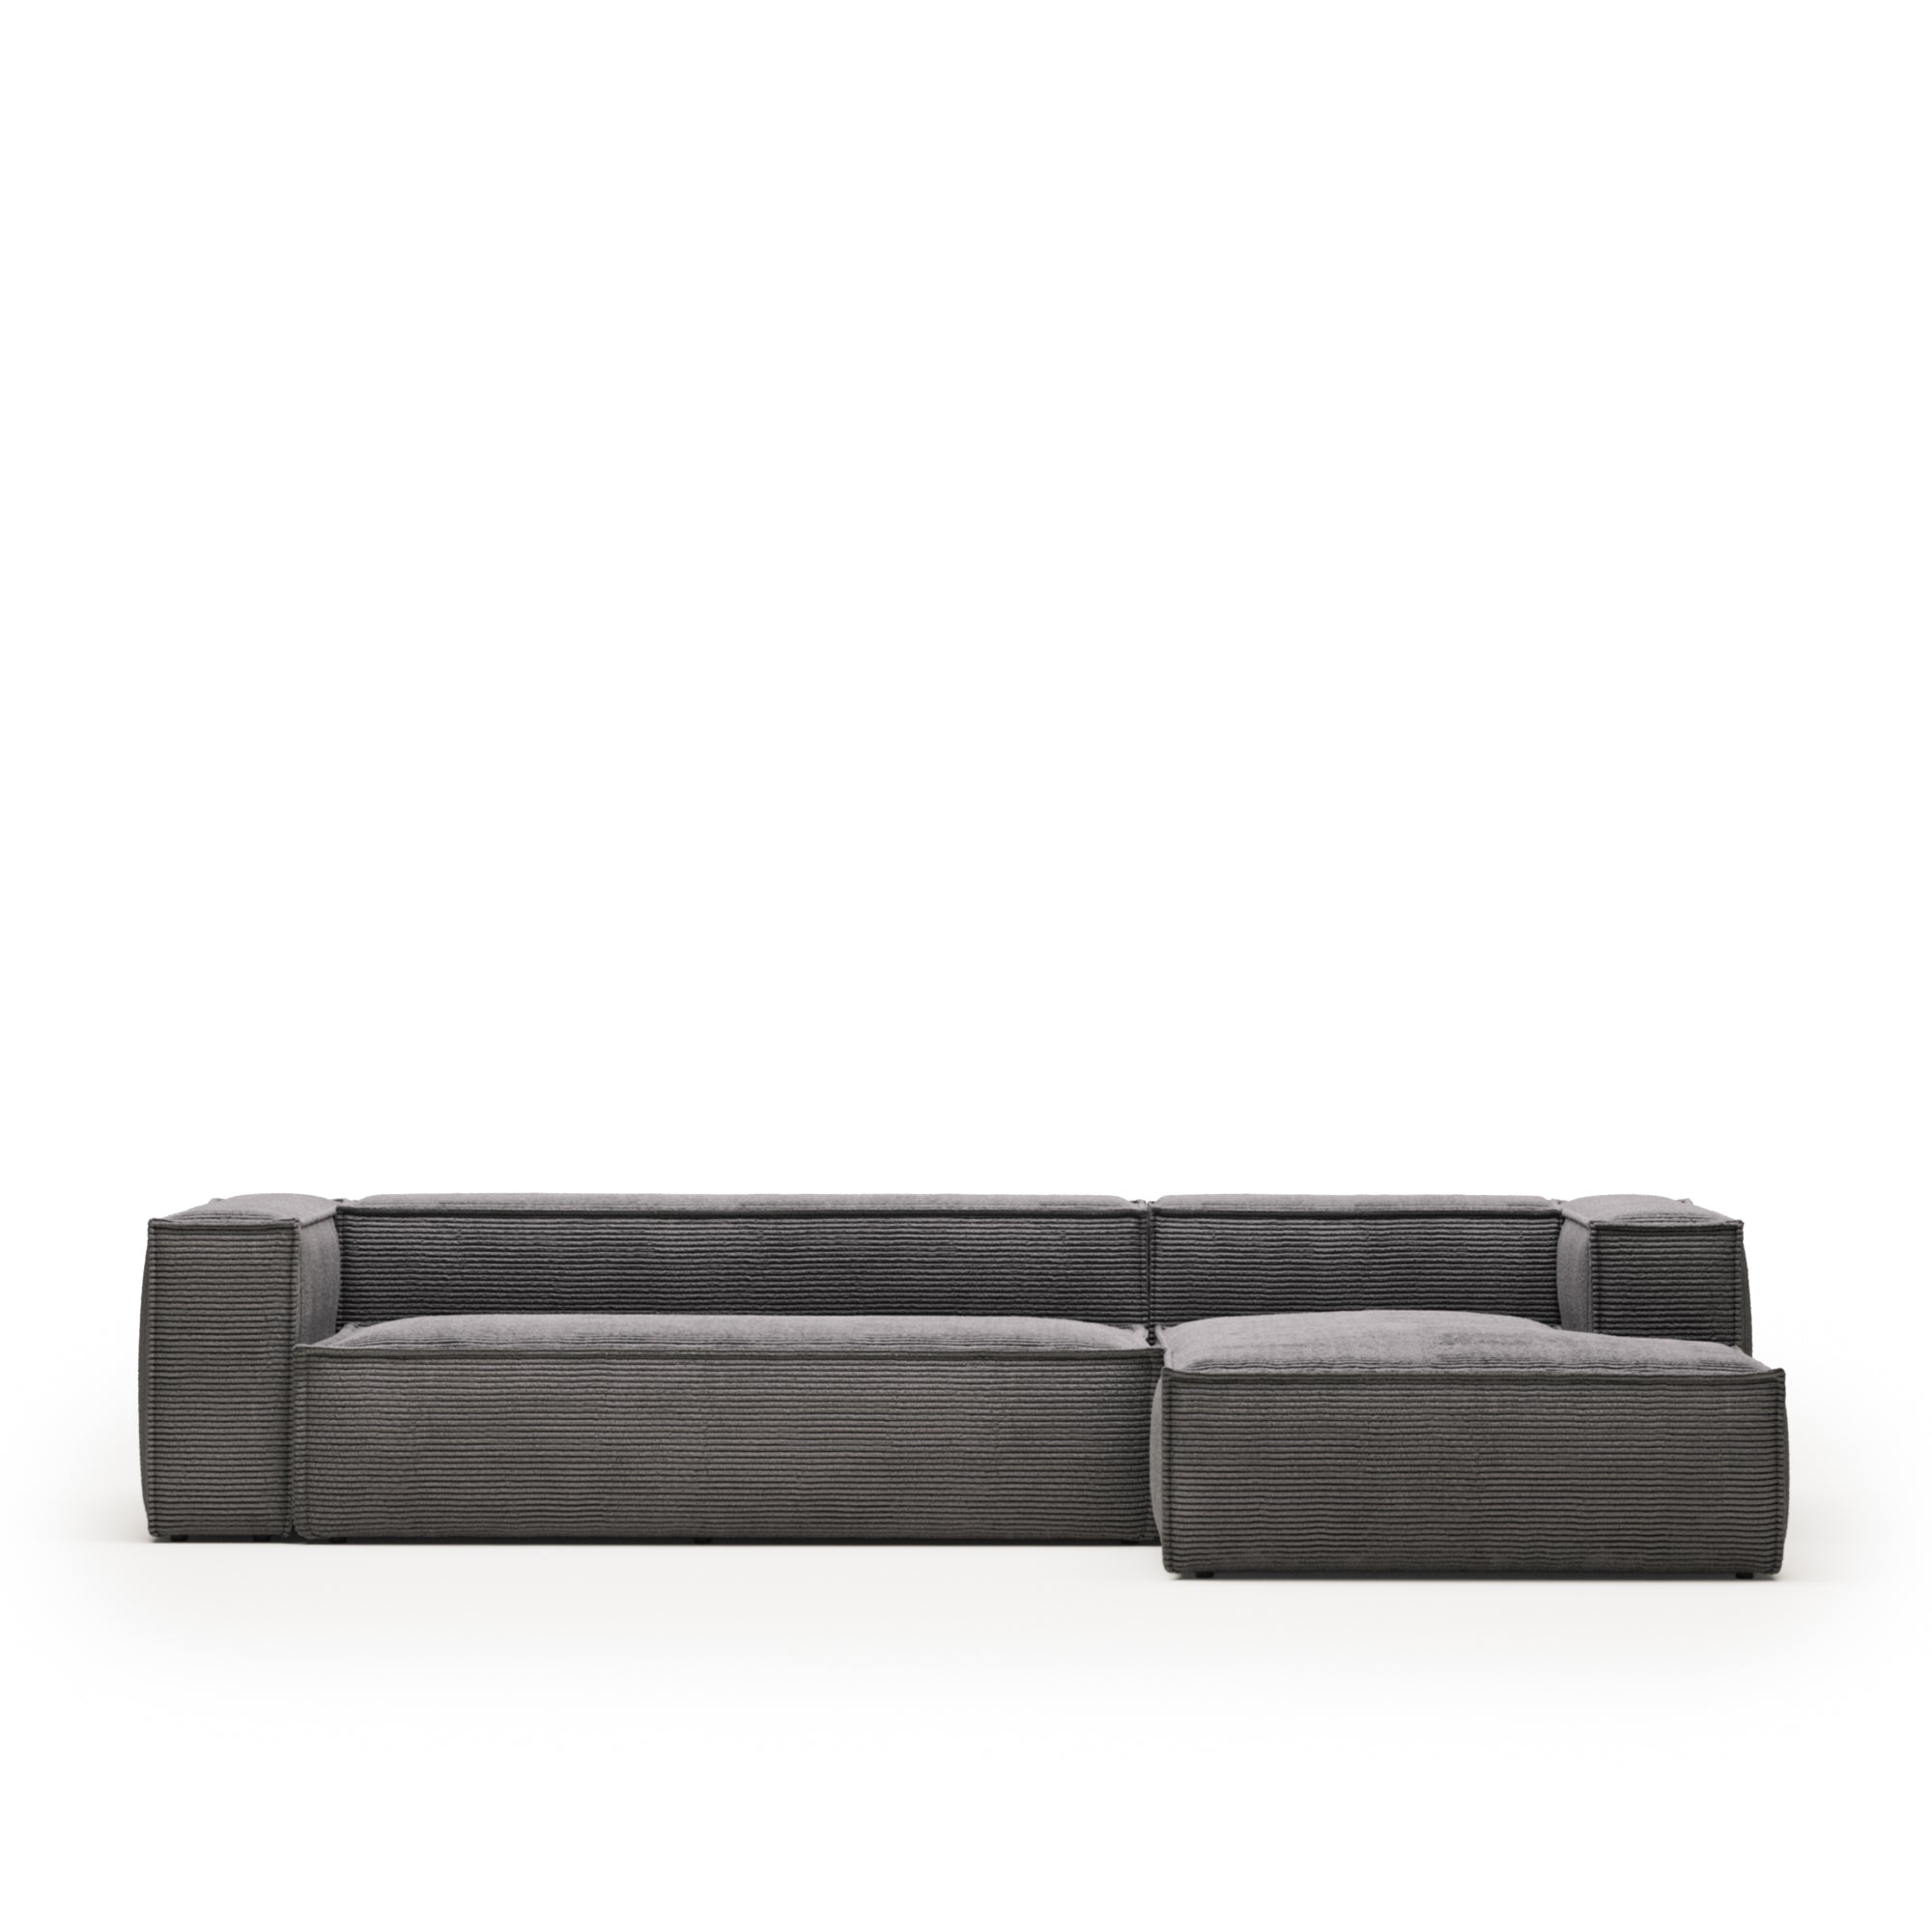 Blok 4 seater sofa with right side chaise longue in grey wide seam corduroy, 330 cm